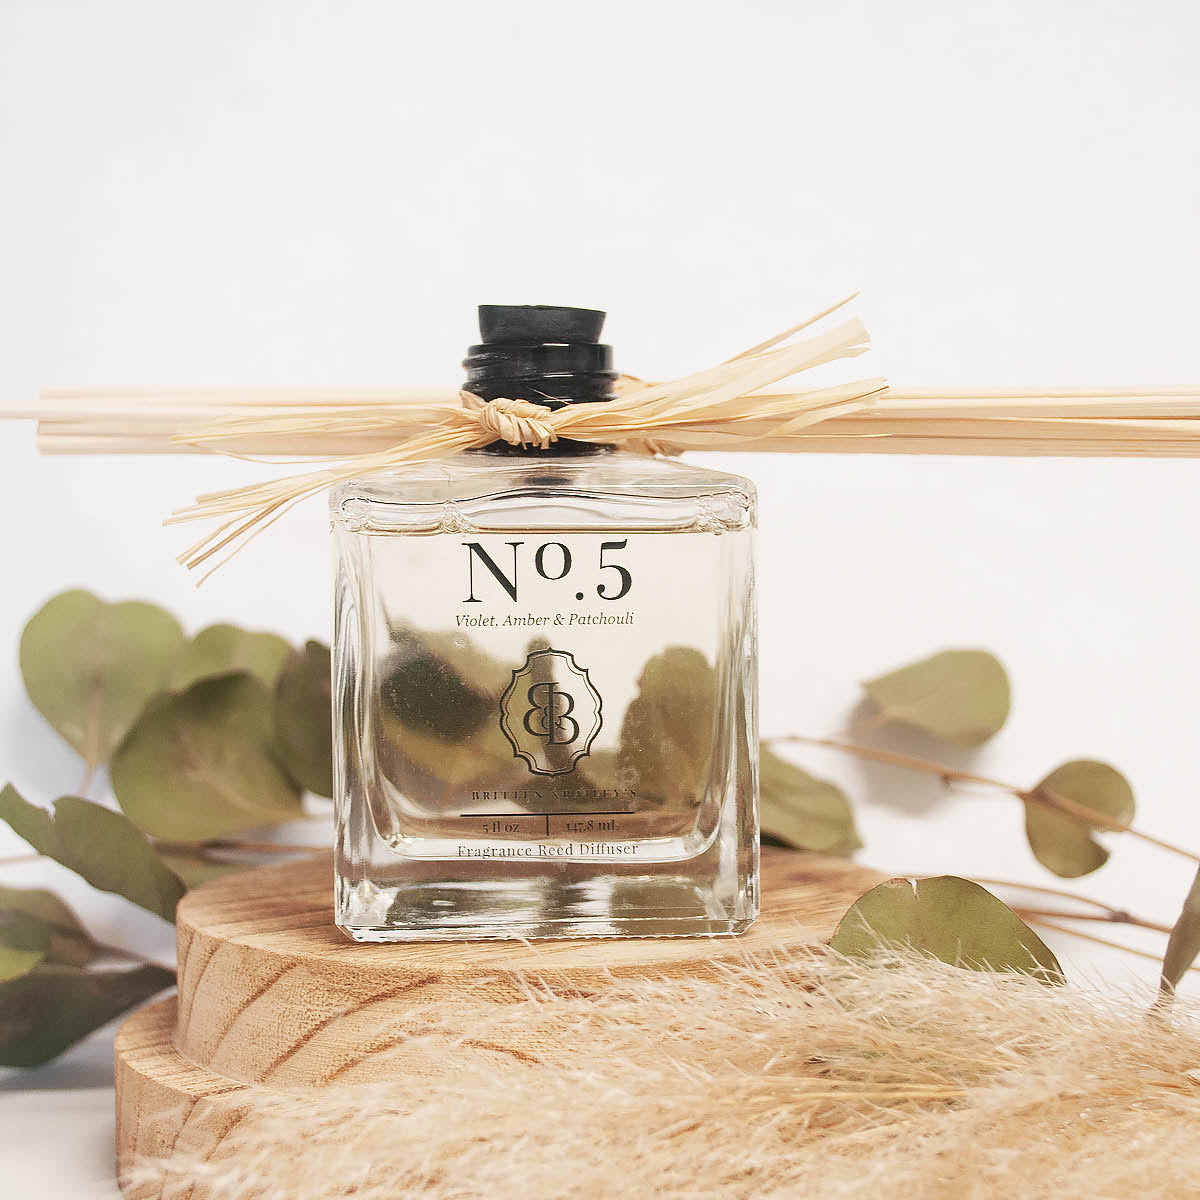 No 5 Violet, Amber & Patchouli, Reed Diffuser – Britten & Bailey's